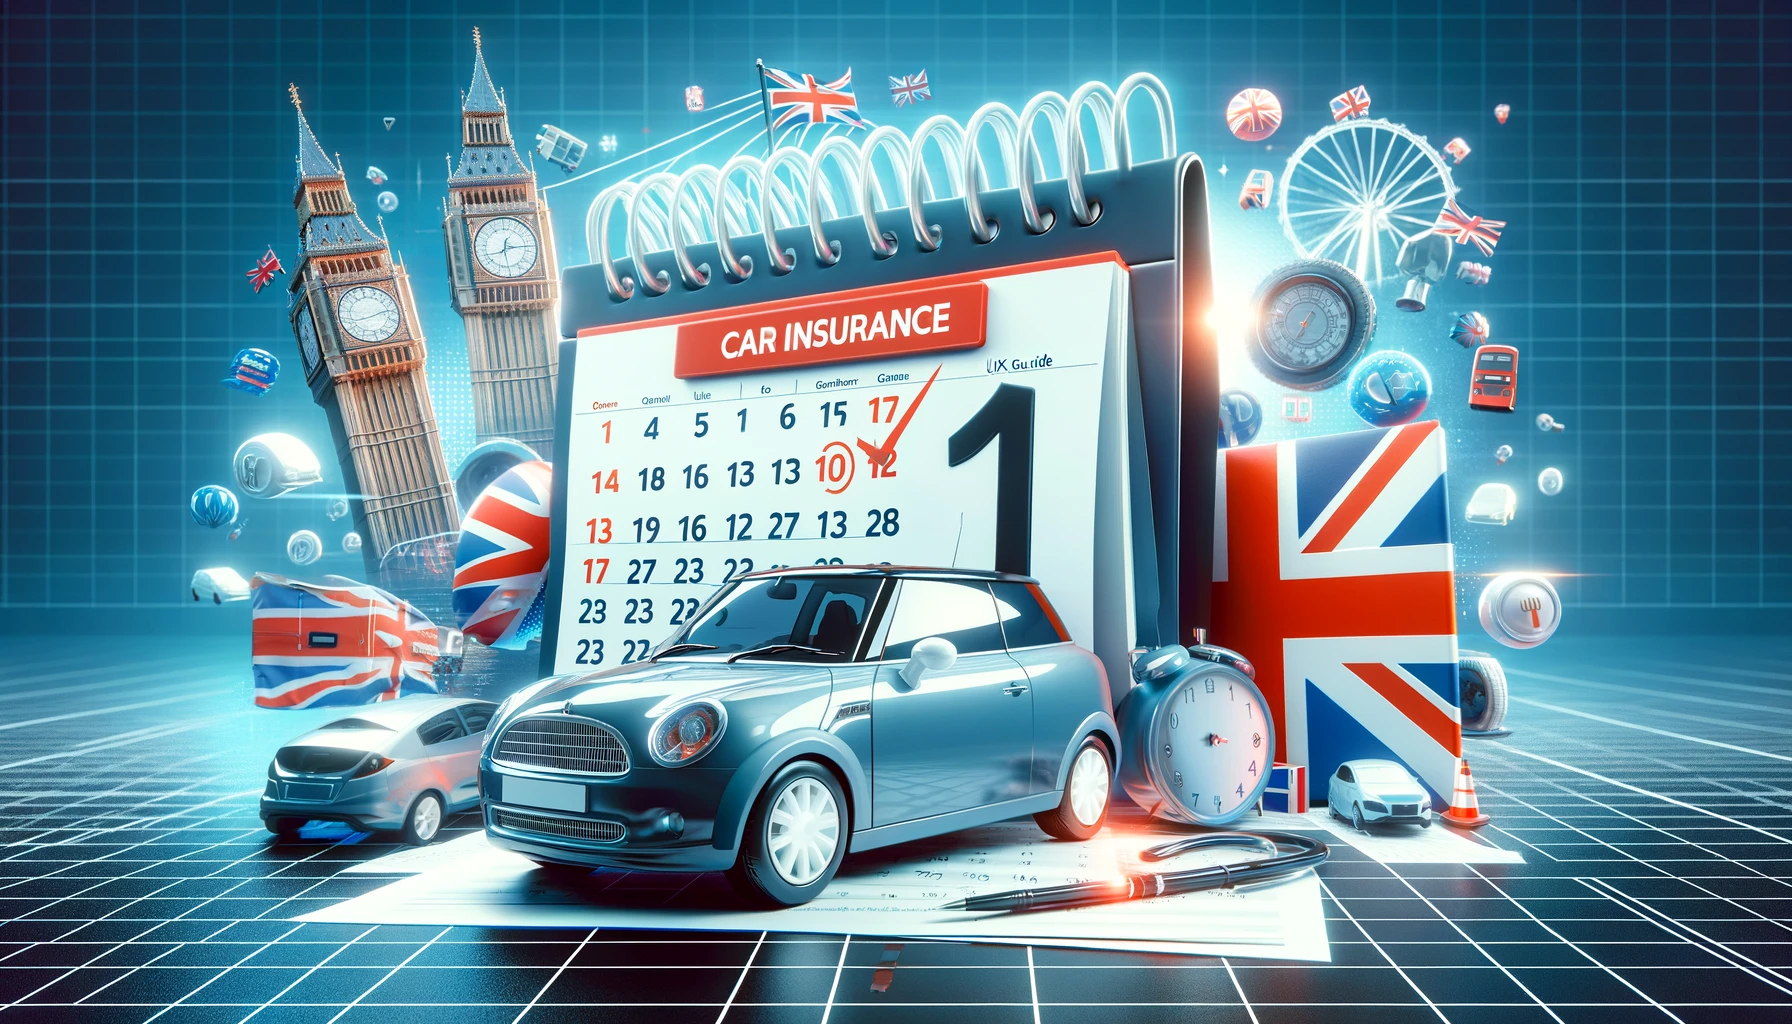 One Day Car Insurance in the UK